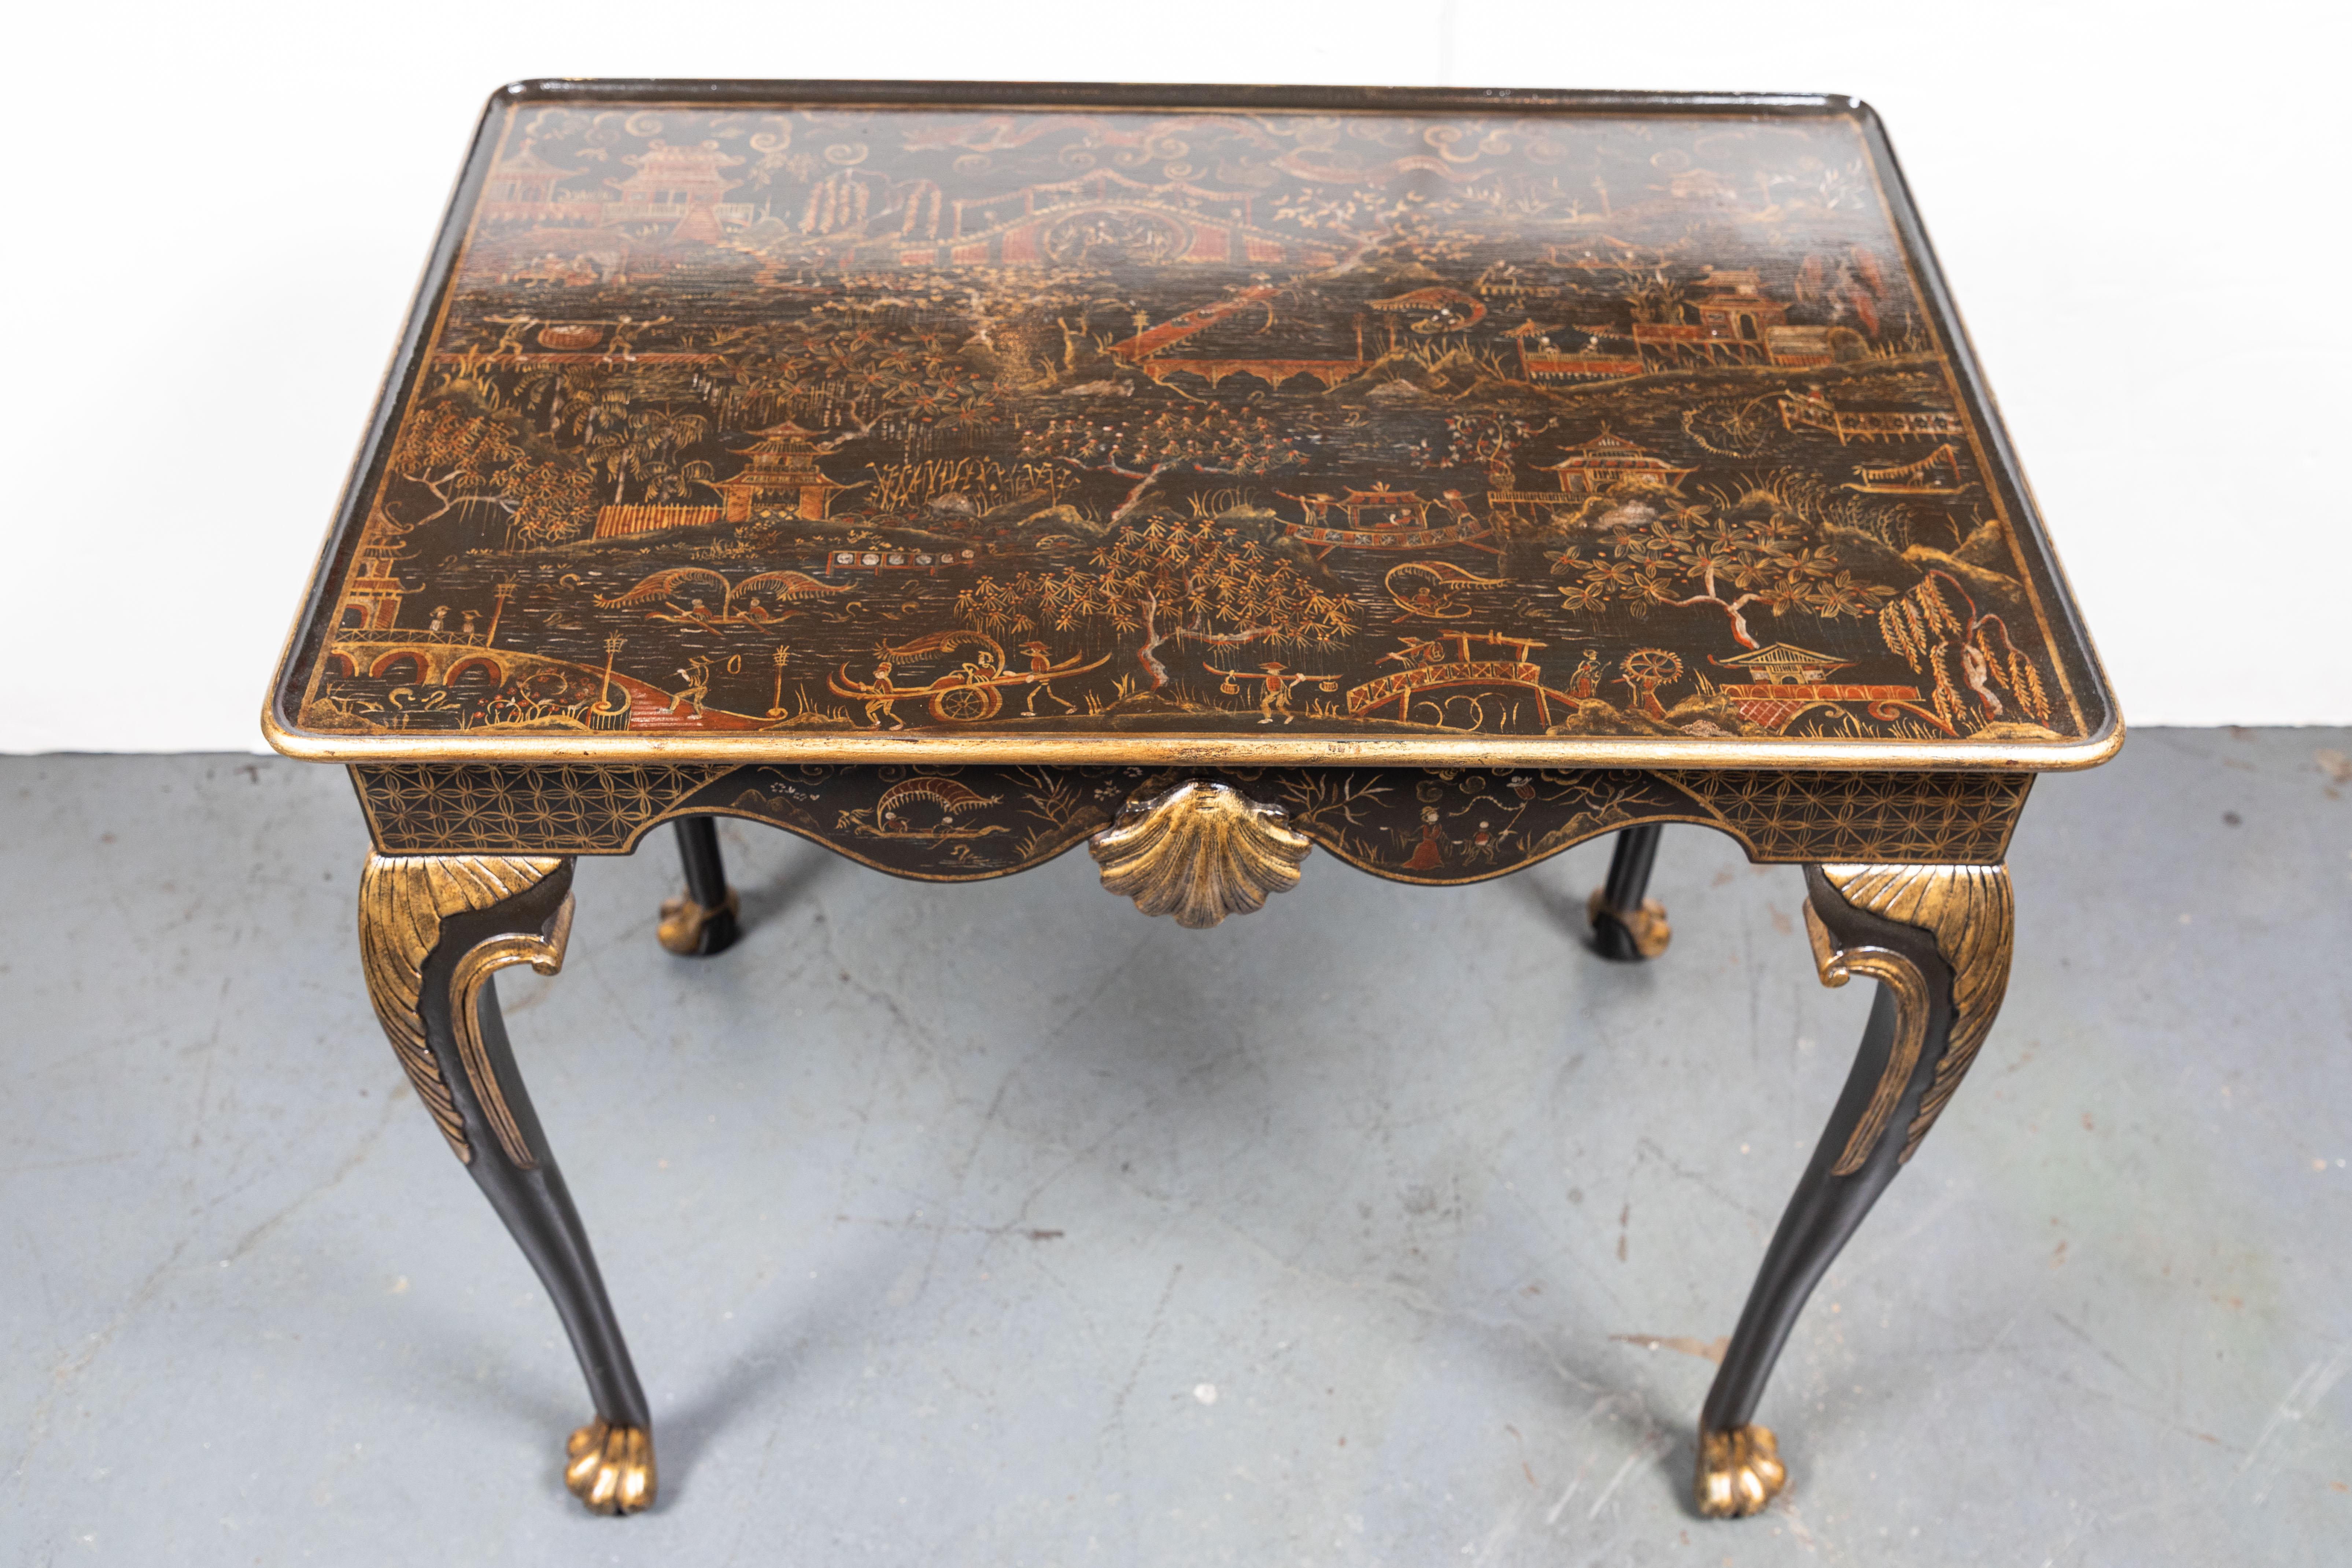 Fabulous pair of midcentury, hand painted, ebonized, parcel-gilt, Chinoiserie side tables with scrolling aprons punctuated by a relief-carved shell. Each terminating on paw feet.